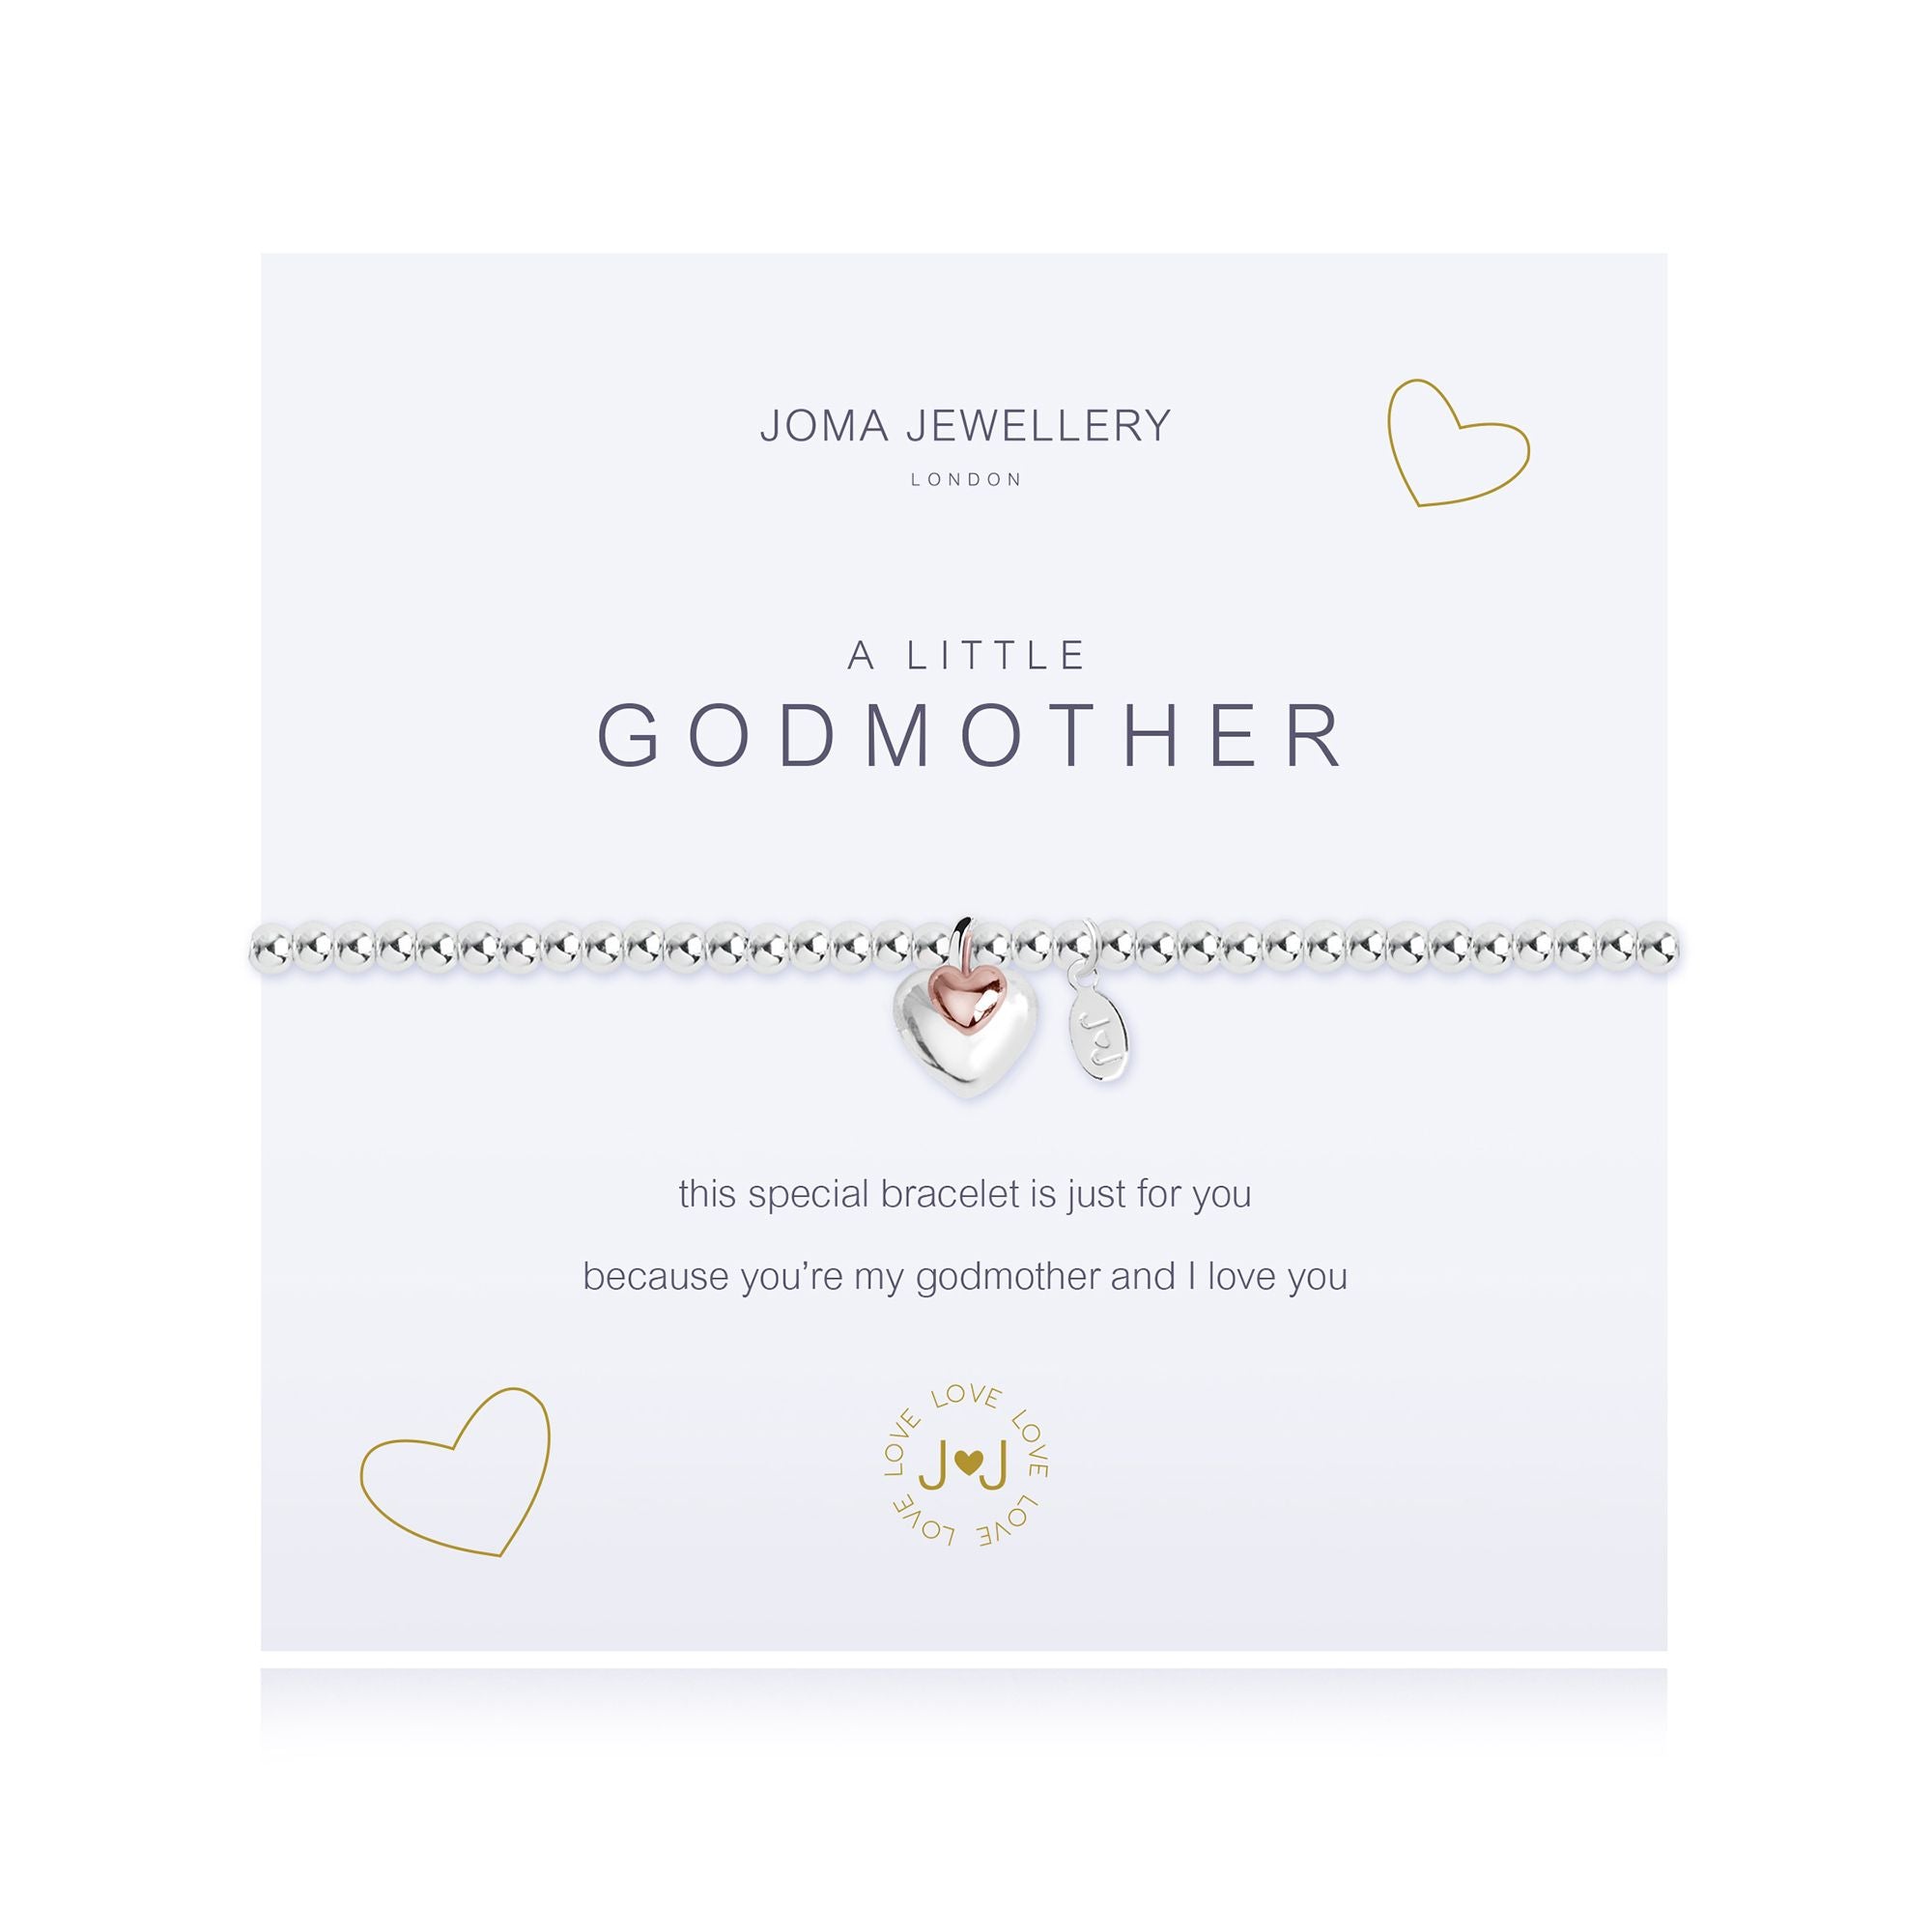 Joma Jewellery 'a little' bracelet with pretty heart charms, presented on a sentiment card which reads: 'This special bracelet is just for you because you're my Godmother and I love you'" Beautifully packaged in it's own Joma Jewellery envelope and gifting card. Metal Type: Silver plated brass Dimensions: 17.5 cm